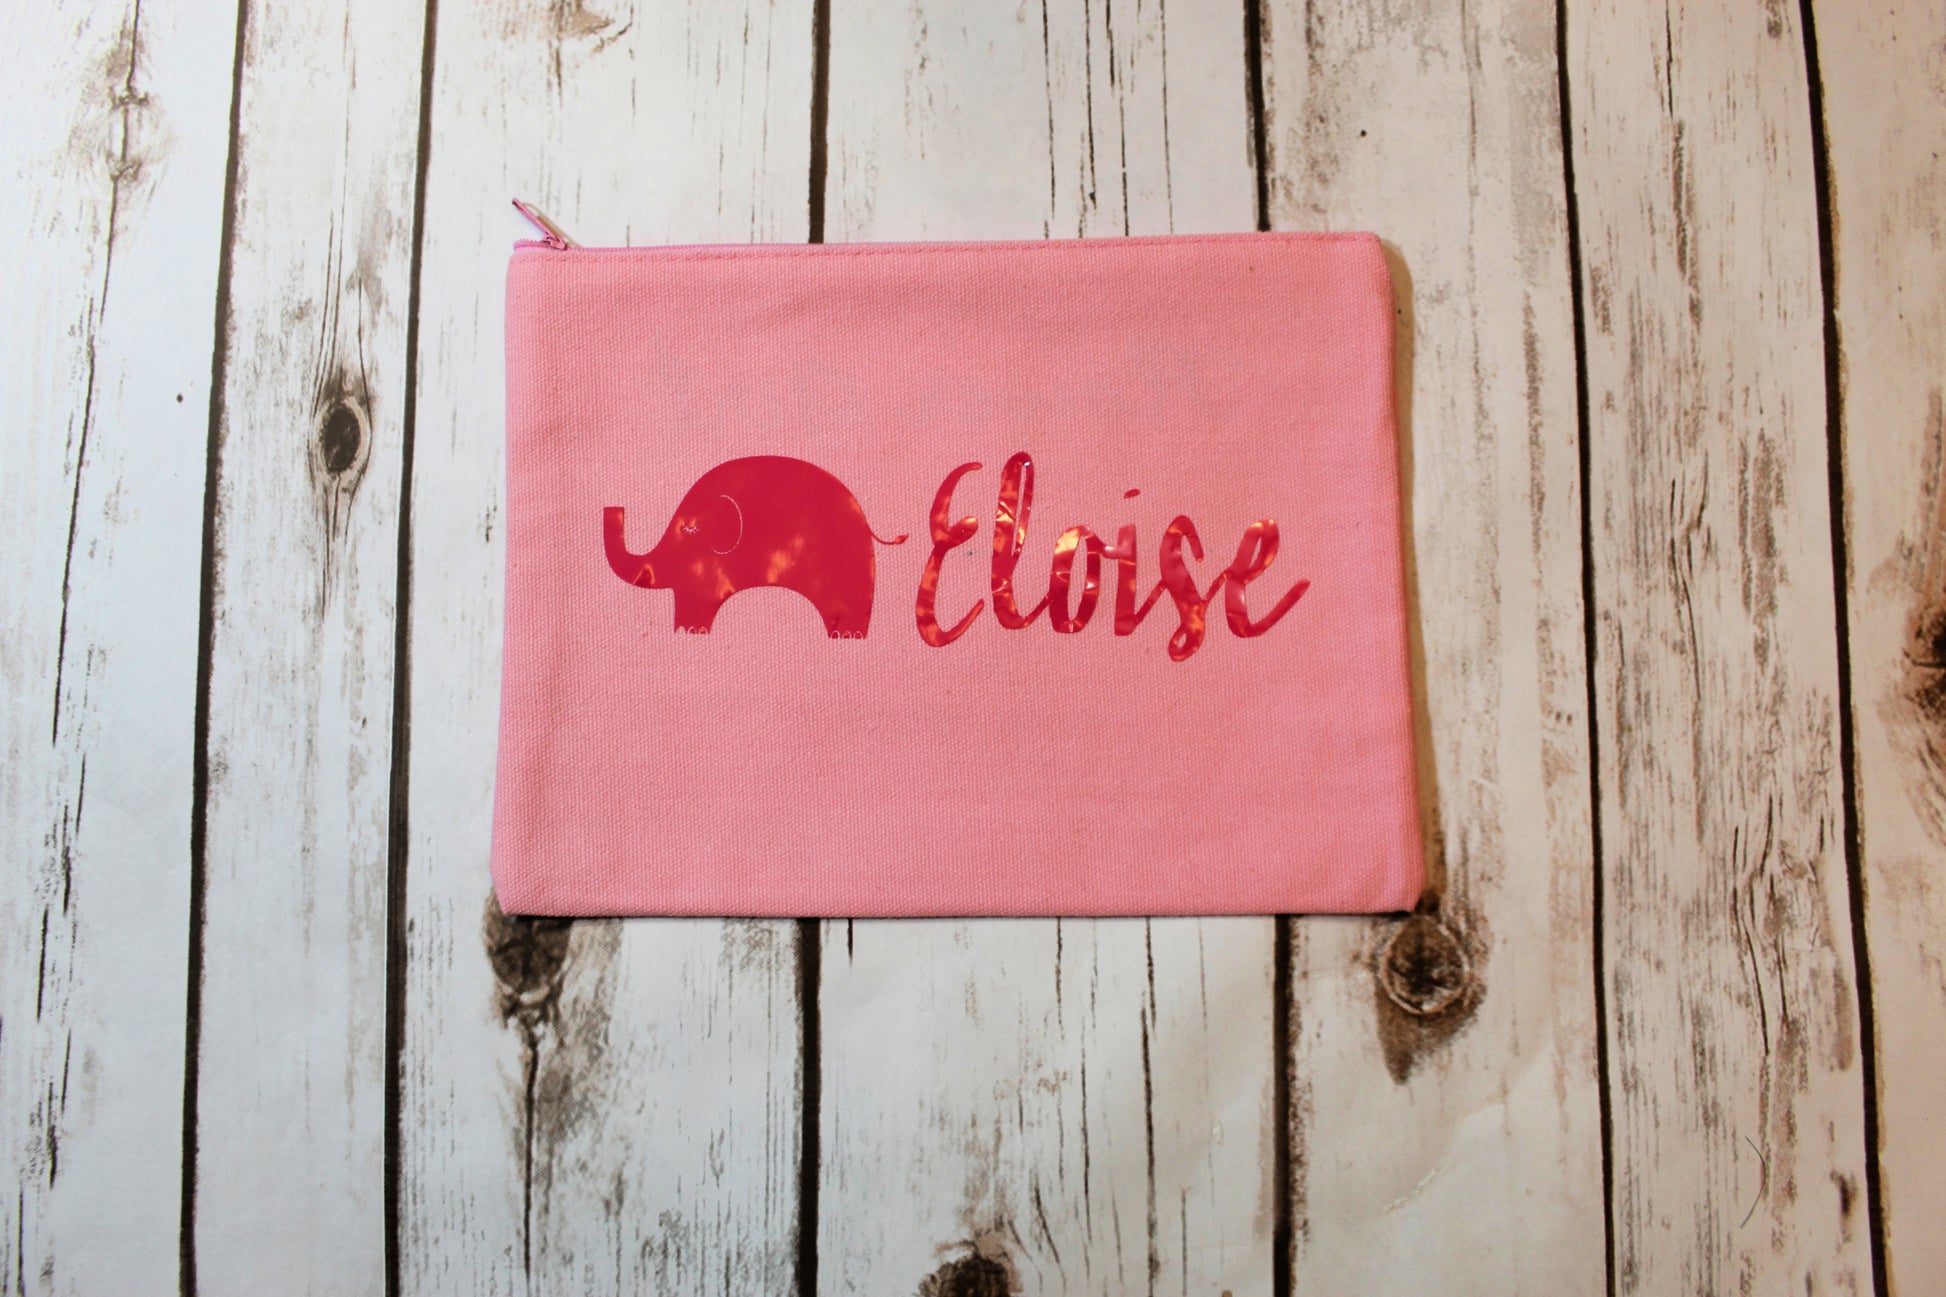 Personalized Elephant Cotton Canvas Make Up Bag freeshipping - Be Vocal Designs